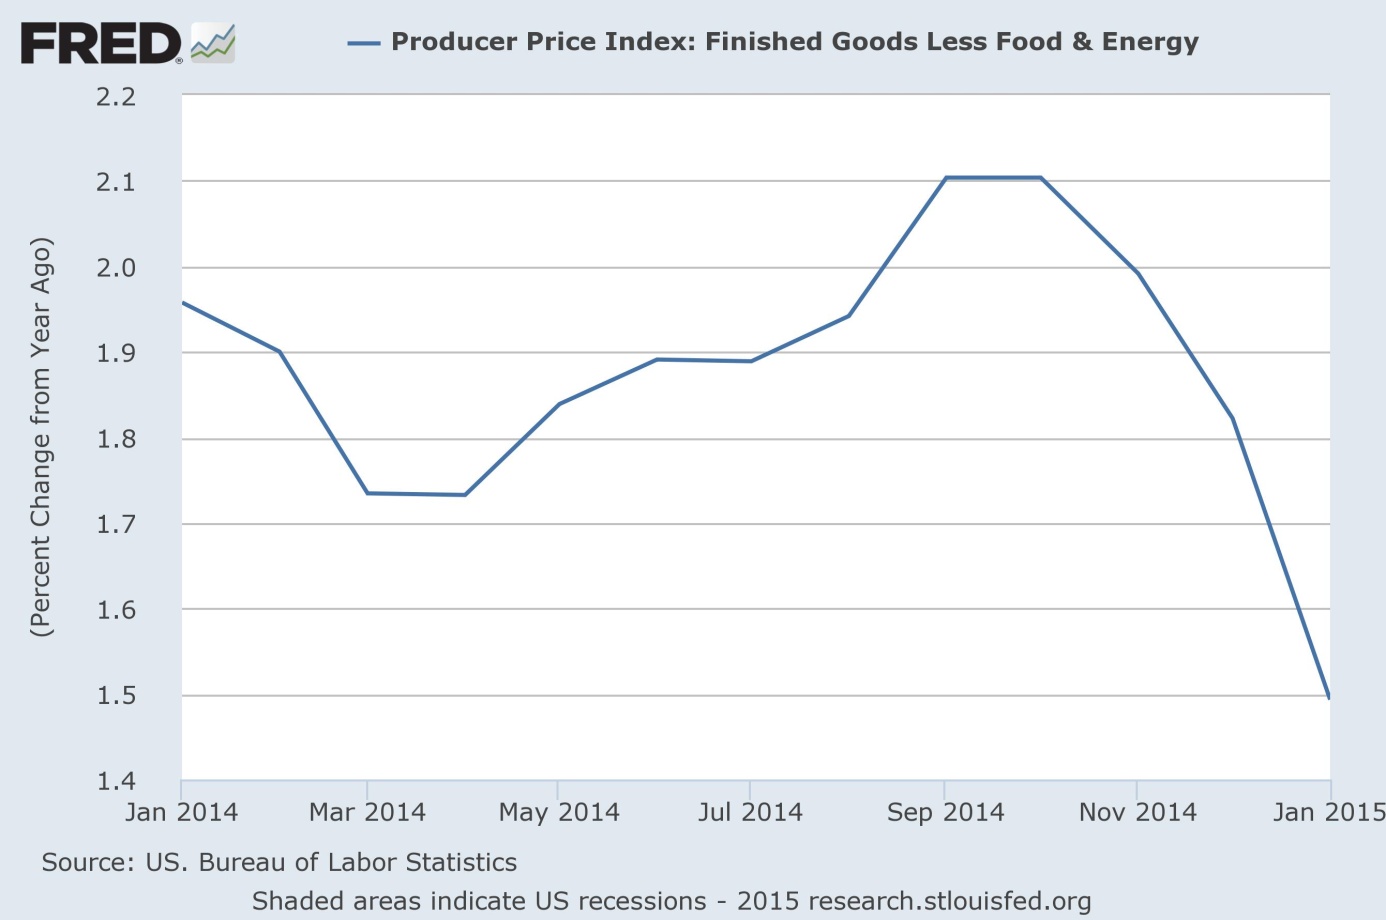 Producer Price Index (finished goods less food and energy) from January 2014 to January 2015 (a percent change from year ago).